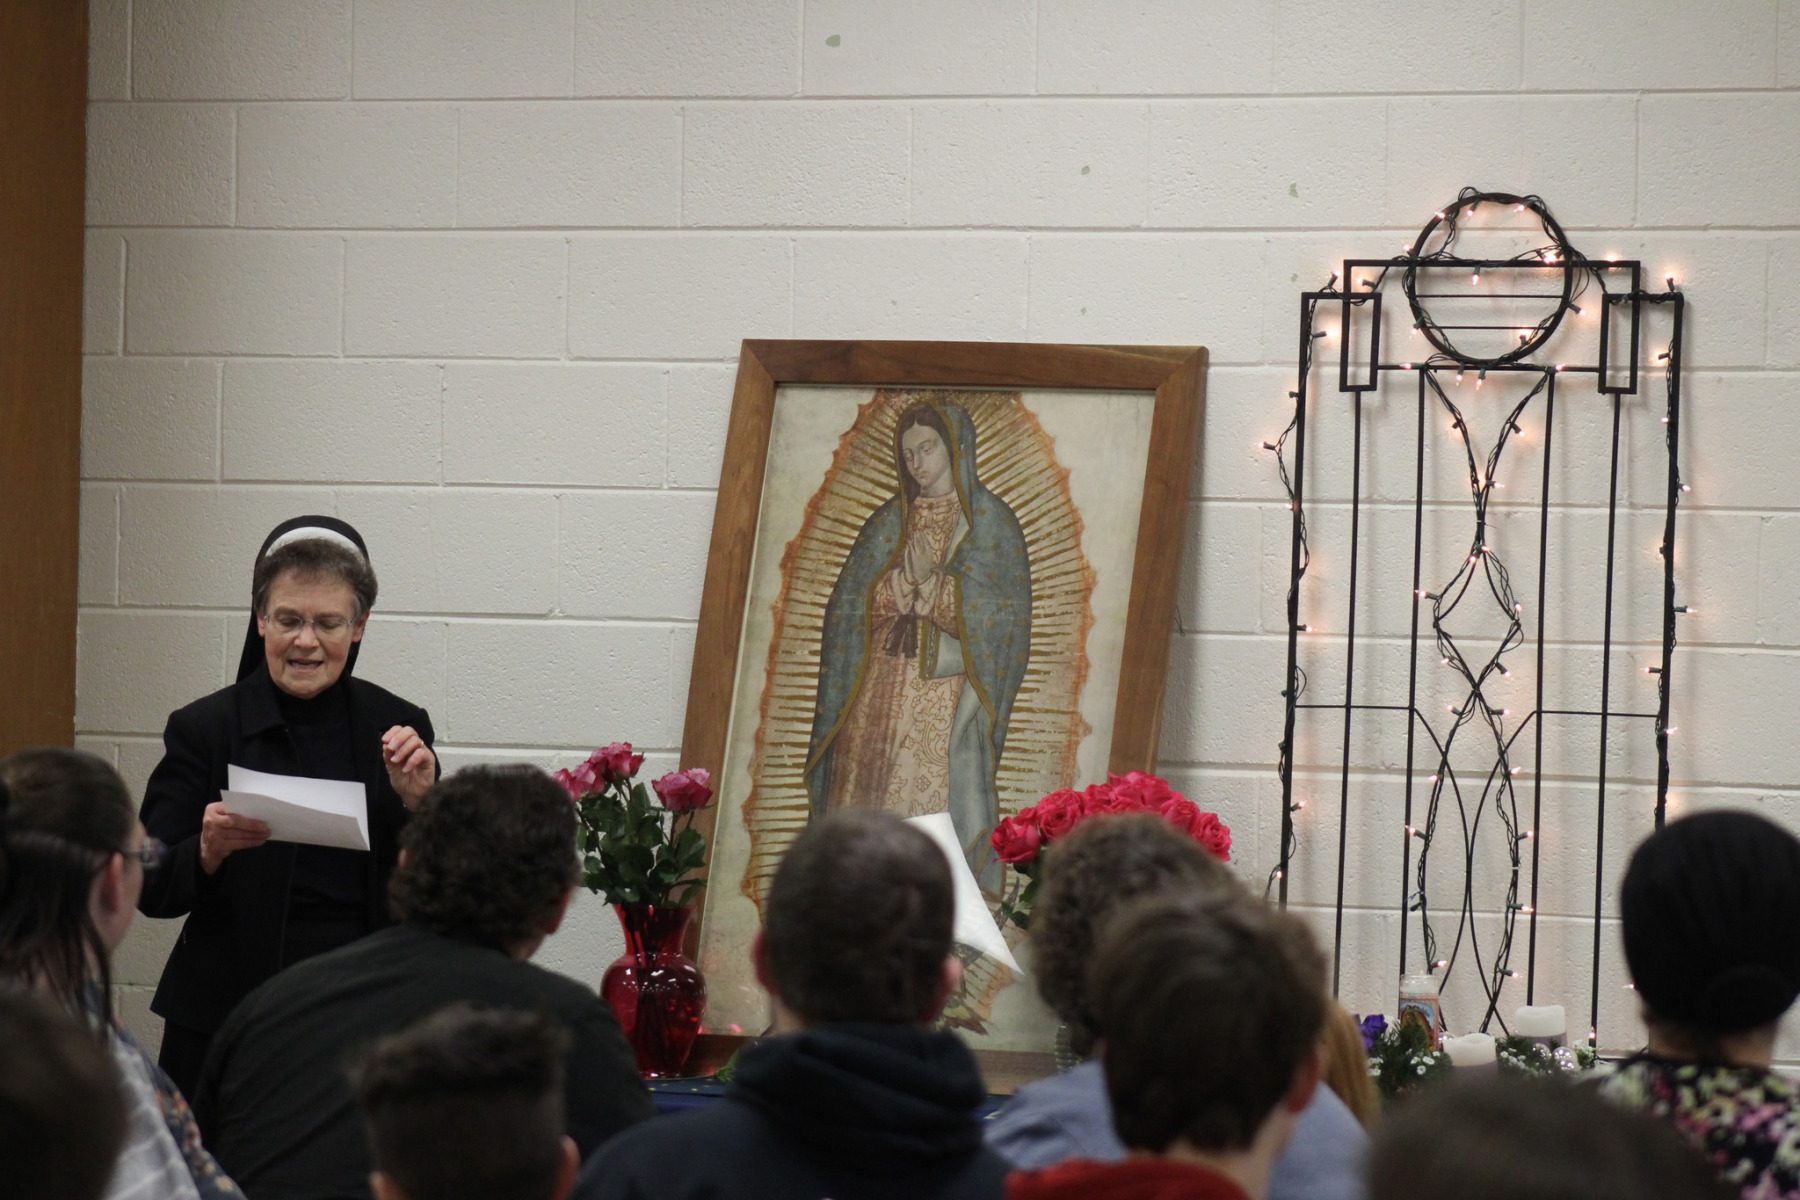 1_Sister-Pam-reads-for-prayer-on-Our-Lady-of-Guadalupe-with-families